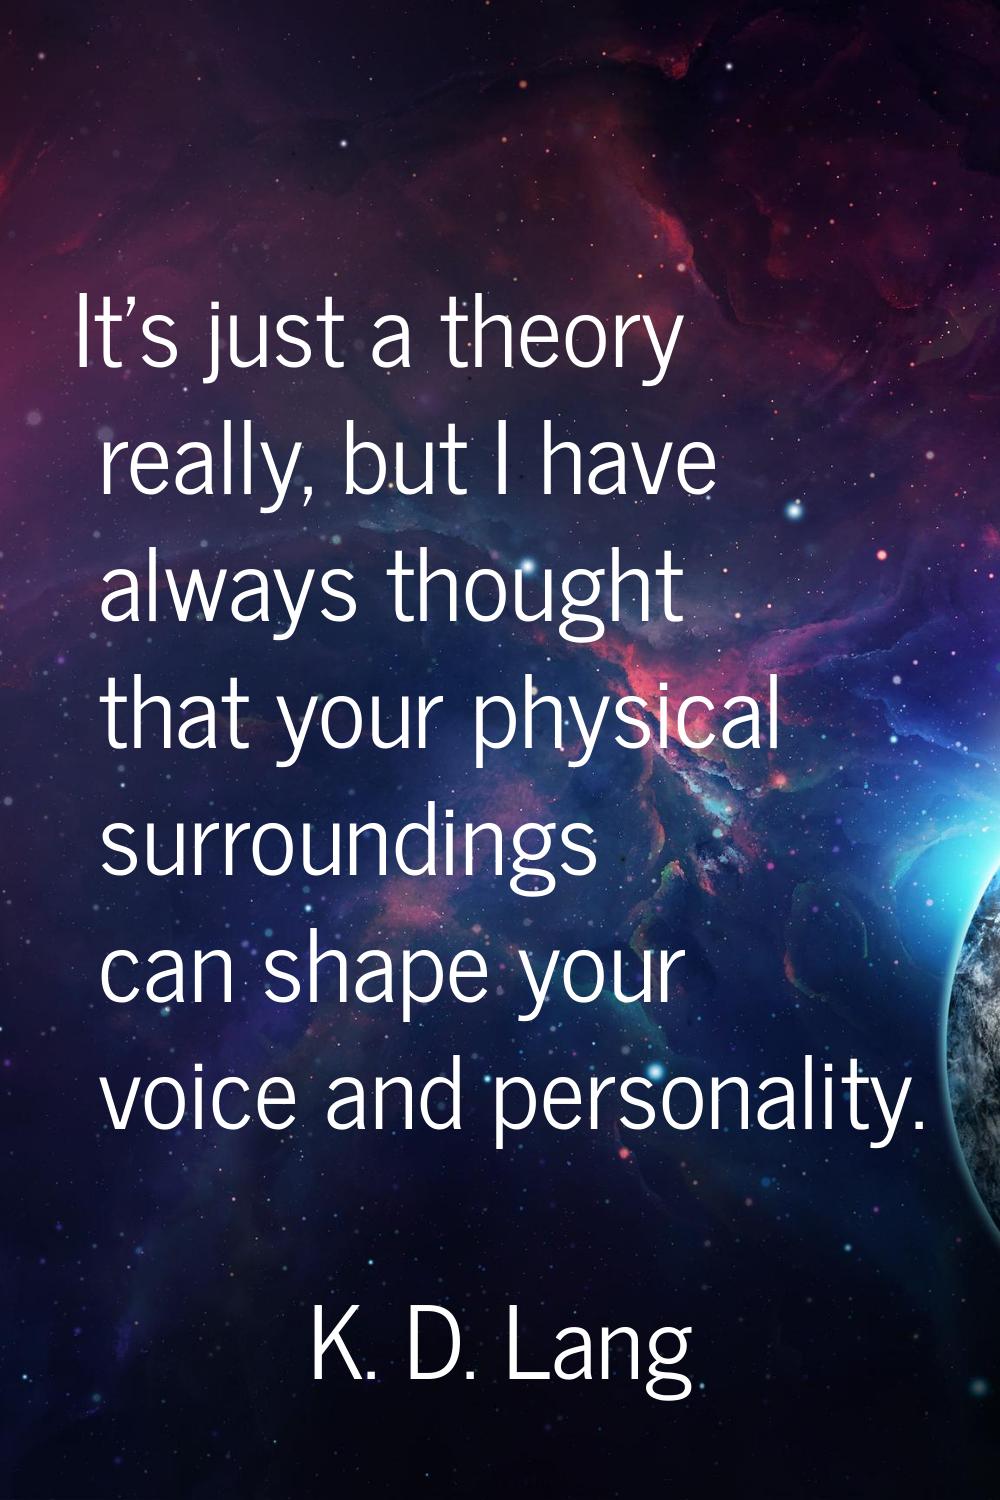 It's just a theory really, but I have always thought that your physical surroundings can shape your